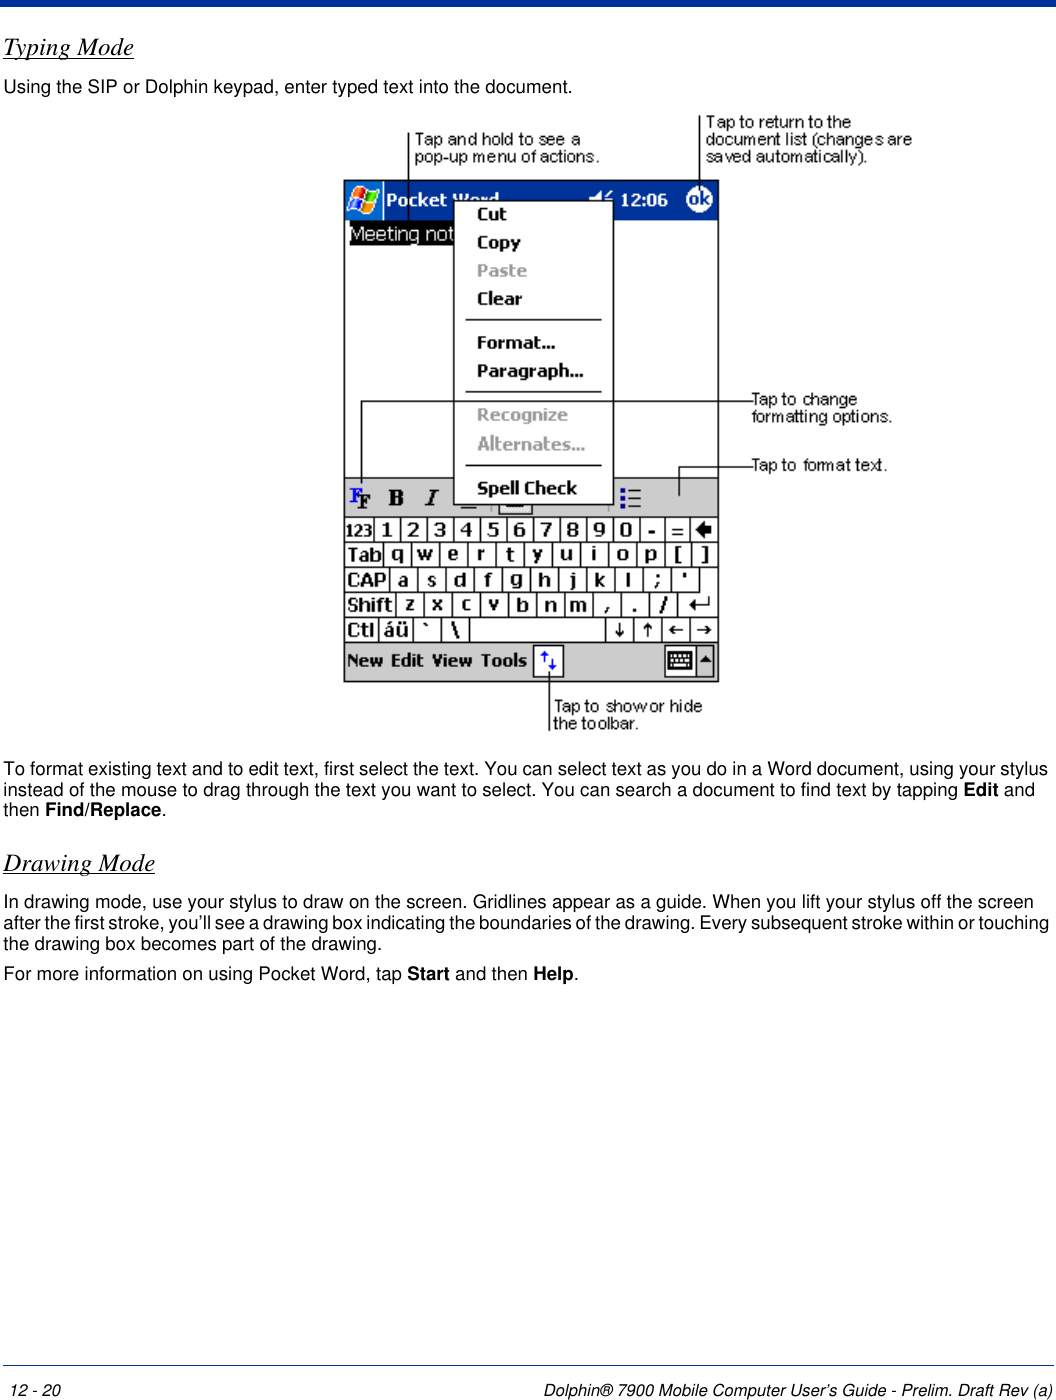 12 - 20 Dolphin® 7900 Mobile Computer User’s Guide - Prelim. Draft Rev (a)Typing ModeUsing the SIP or Dolphin keypad, enter typed text into the document. To format existing text and to edit text, first select the text. You can select text as you do in a Word document, using your stylus instead of the mouse to drag through the text you want to select. You can search a document to find text by tapping Edit and then Find/Replace.Drawing ModeIn drawing mode, use your stylus to draw on the screen. Gridlines appear as a guide. When you lift your stylus off the screen after the first stroke, you’ll see a drawing box indicating the boundaries of the drawing. Every subsequent stroke within or touching the drawing box becomes part of the drawing. For more information on using Pocket Word, tap Start and then Help.